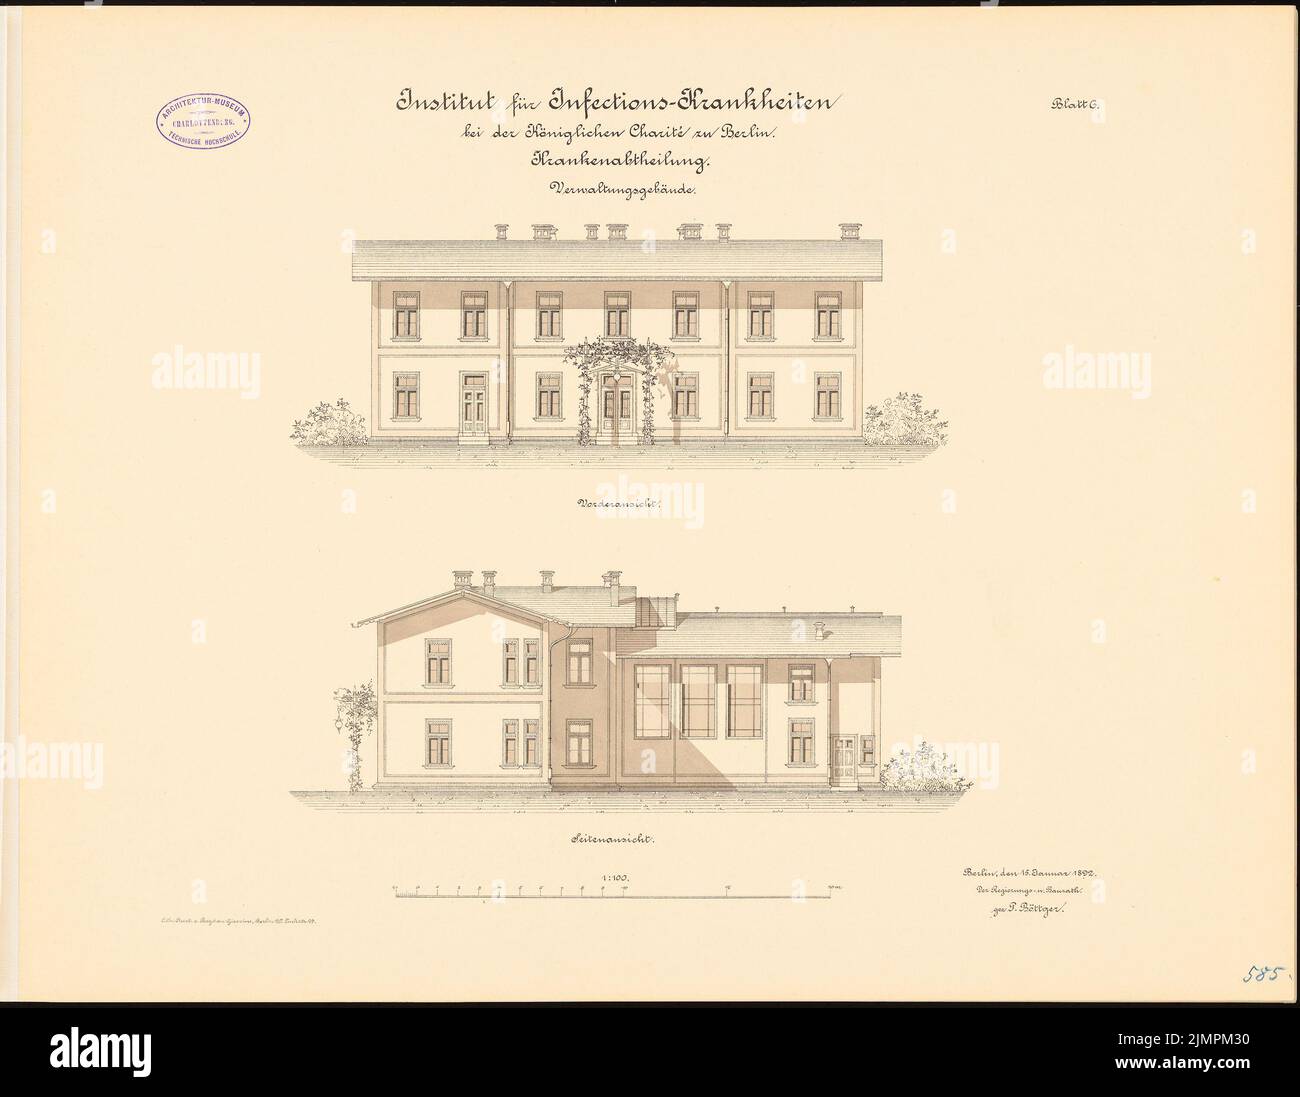 Böttger Paul (1851-1933), Institute for Infectious Diseases of the Charité, Berlin (1891-1892): Hospital department, administrative building: front view, side view 1: 100. Lithograph colored on the box, 48.5 x 62.5 cm (including scan edges) Böttger Paul  (1851-1933): Institut für Infektionskrankheiten der Charité, Berlin Stock Photo